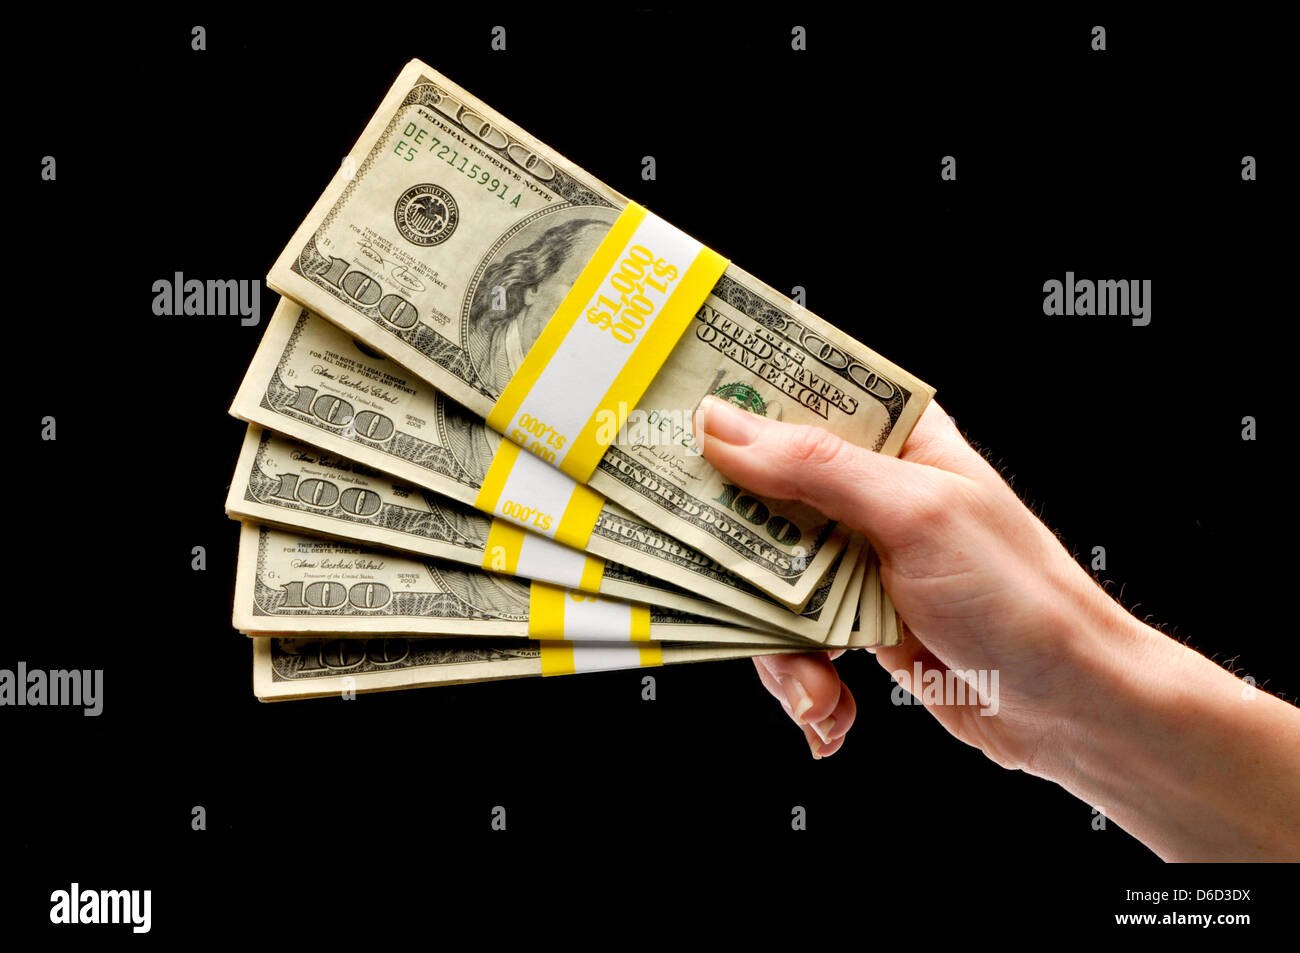 hand holding stackf of us currency Stock Photo